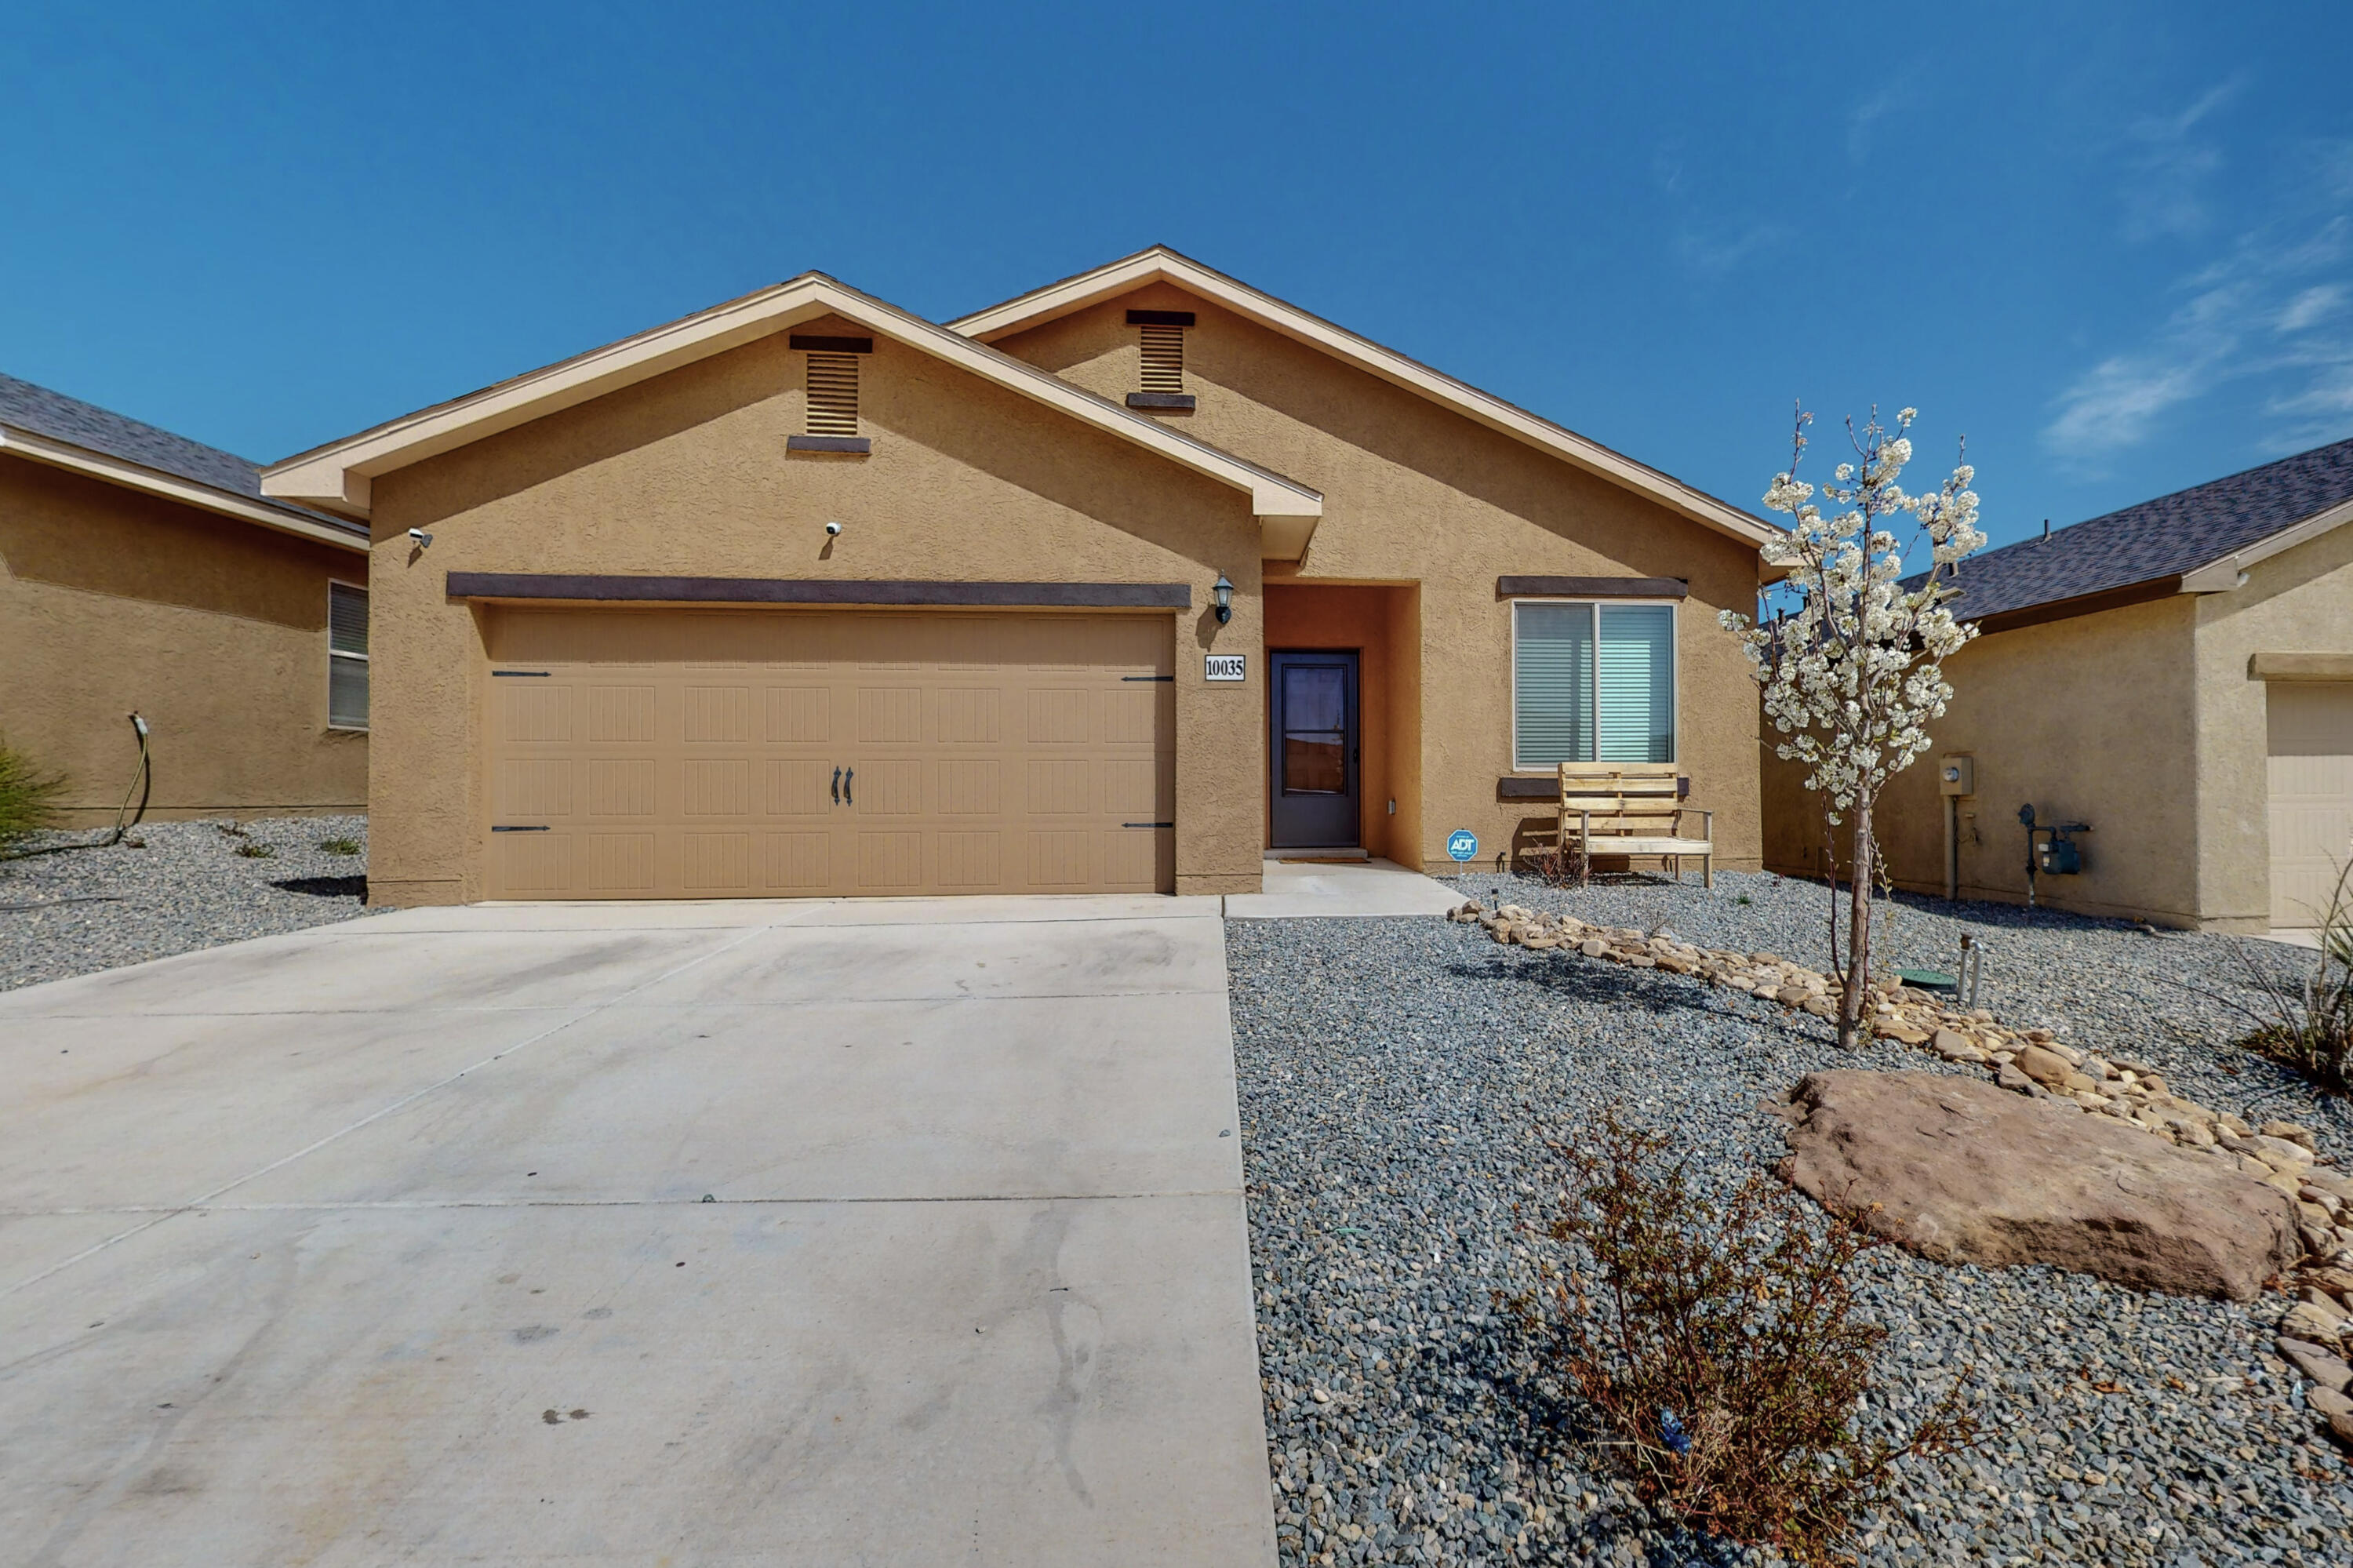 Beautiful home built in 2020. Move in ready with full kitchen appliances. Has 3 bedrooms and 2 bathrooms. Located at a very convenient location near Atrisco High School and I-40. Schedule your showing now!:)